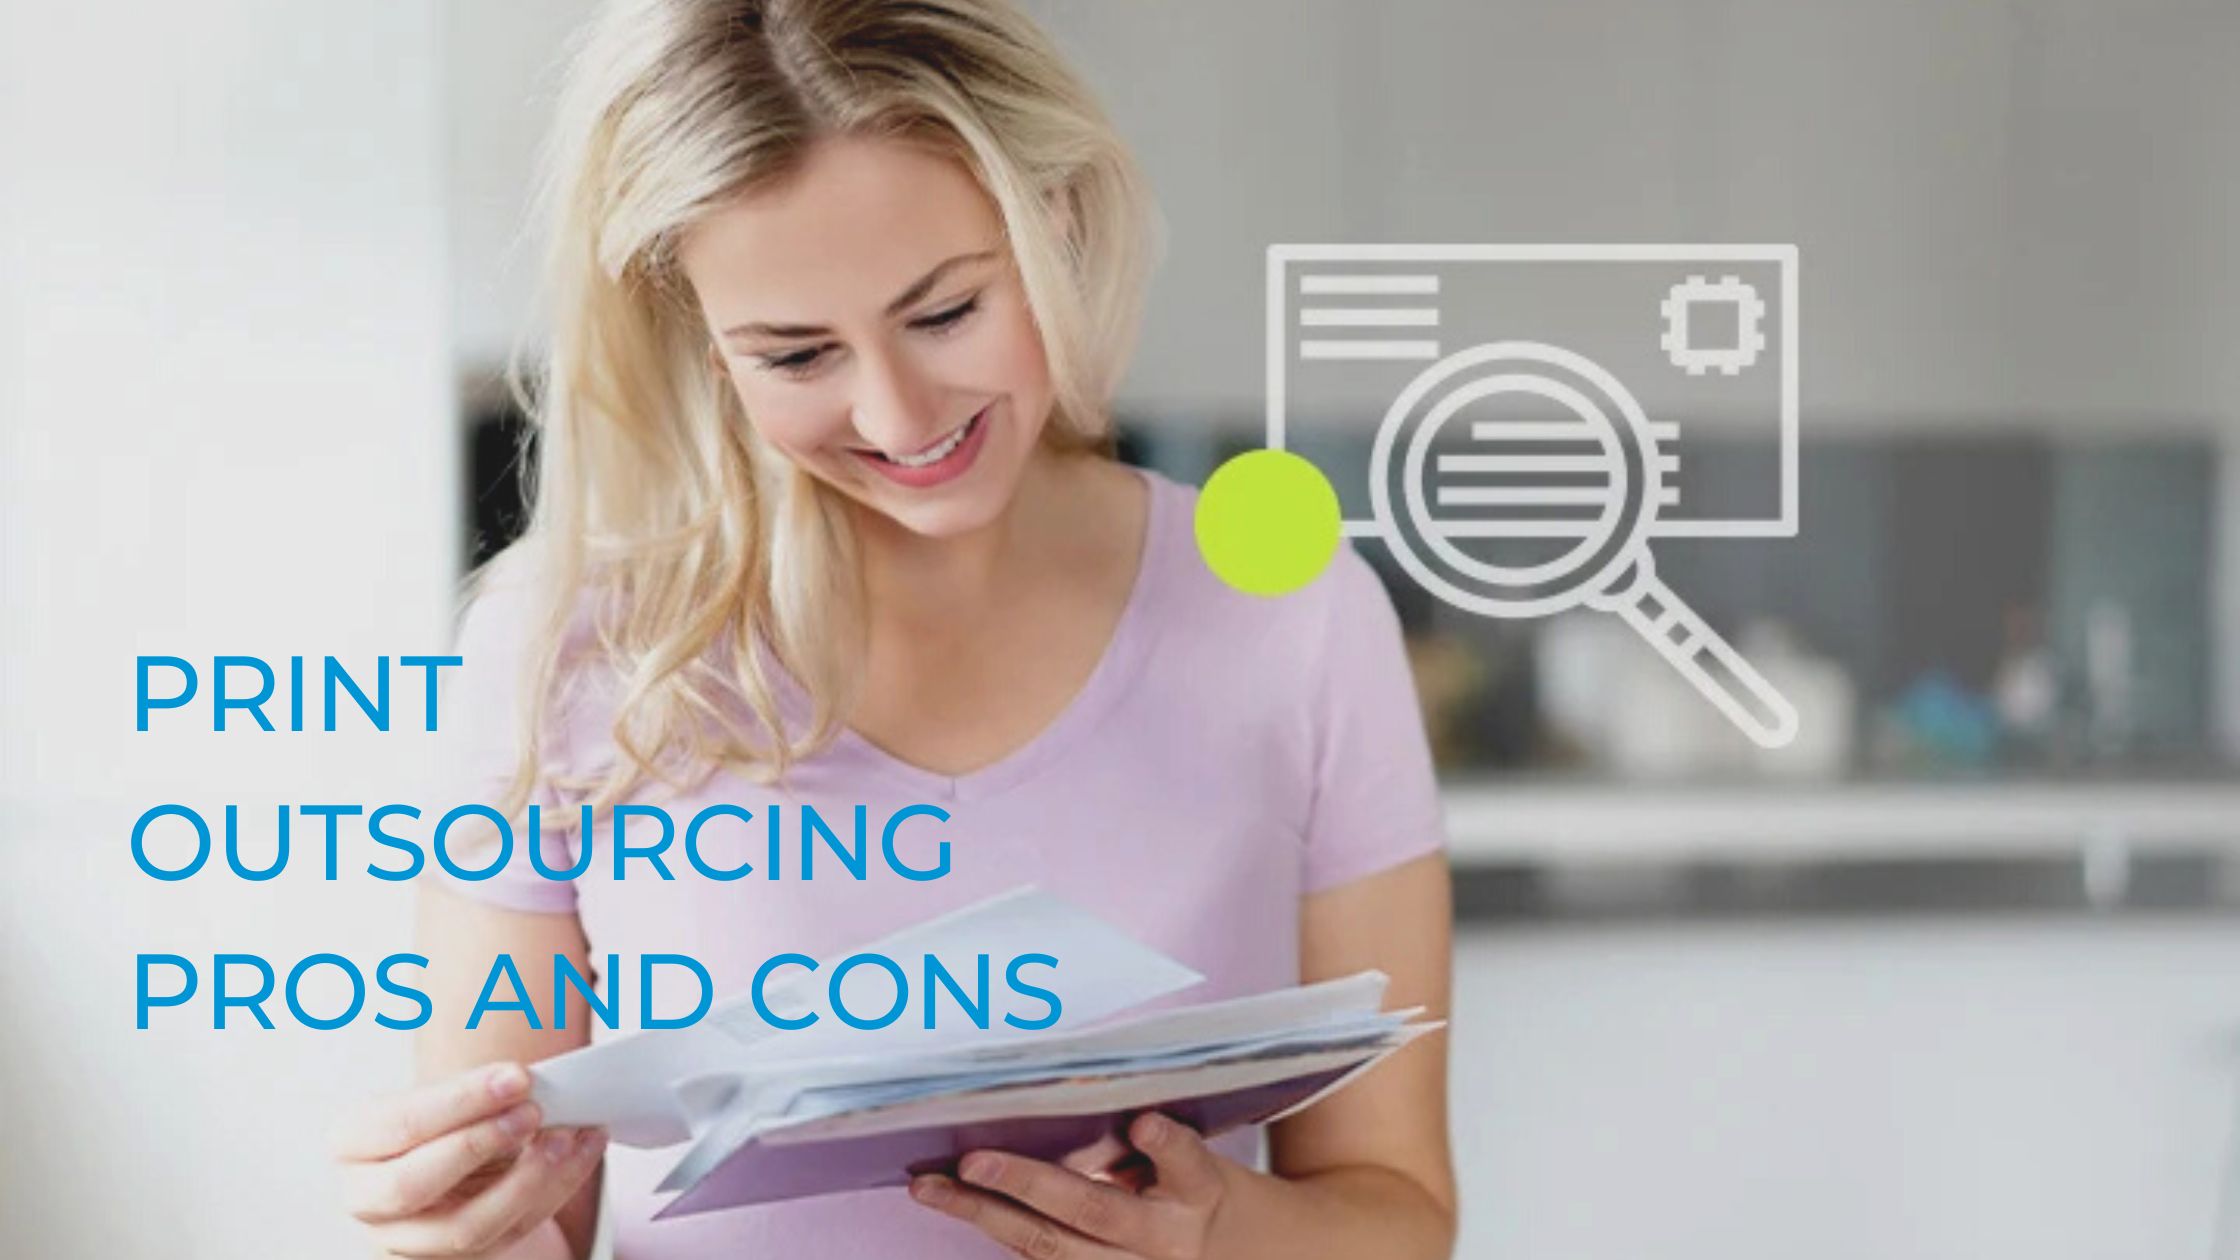 Print Outsourcing Pros And Cons